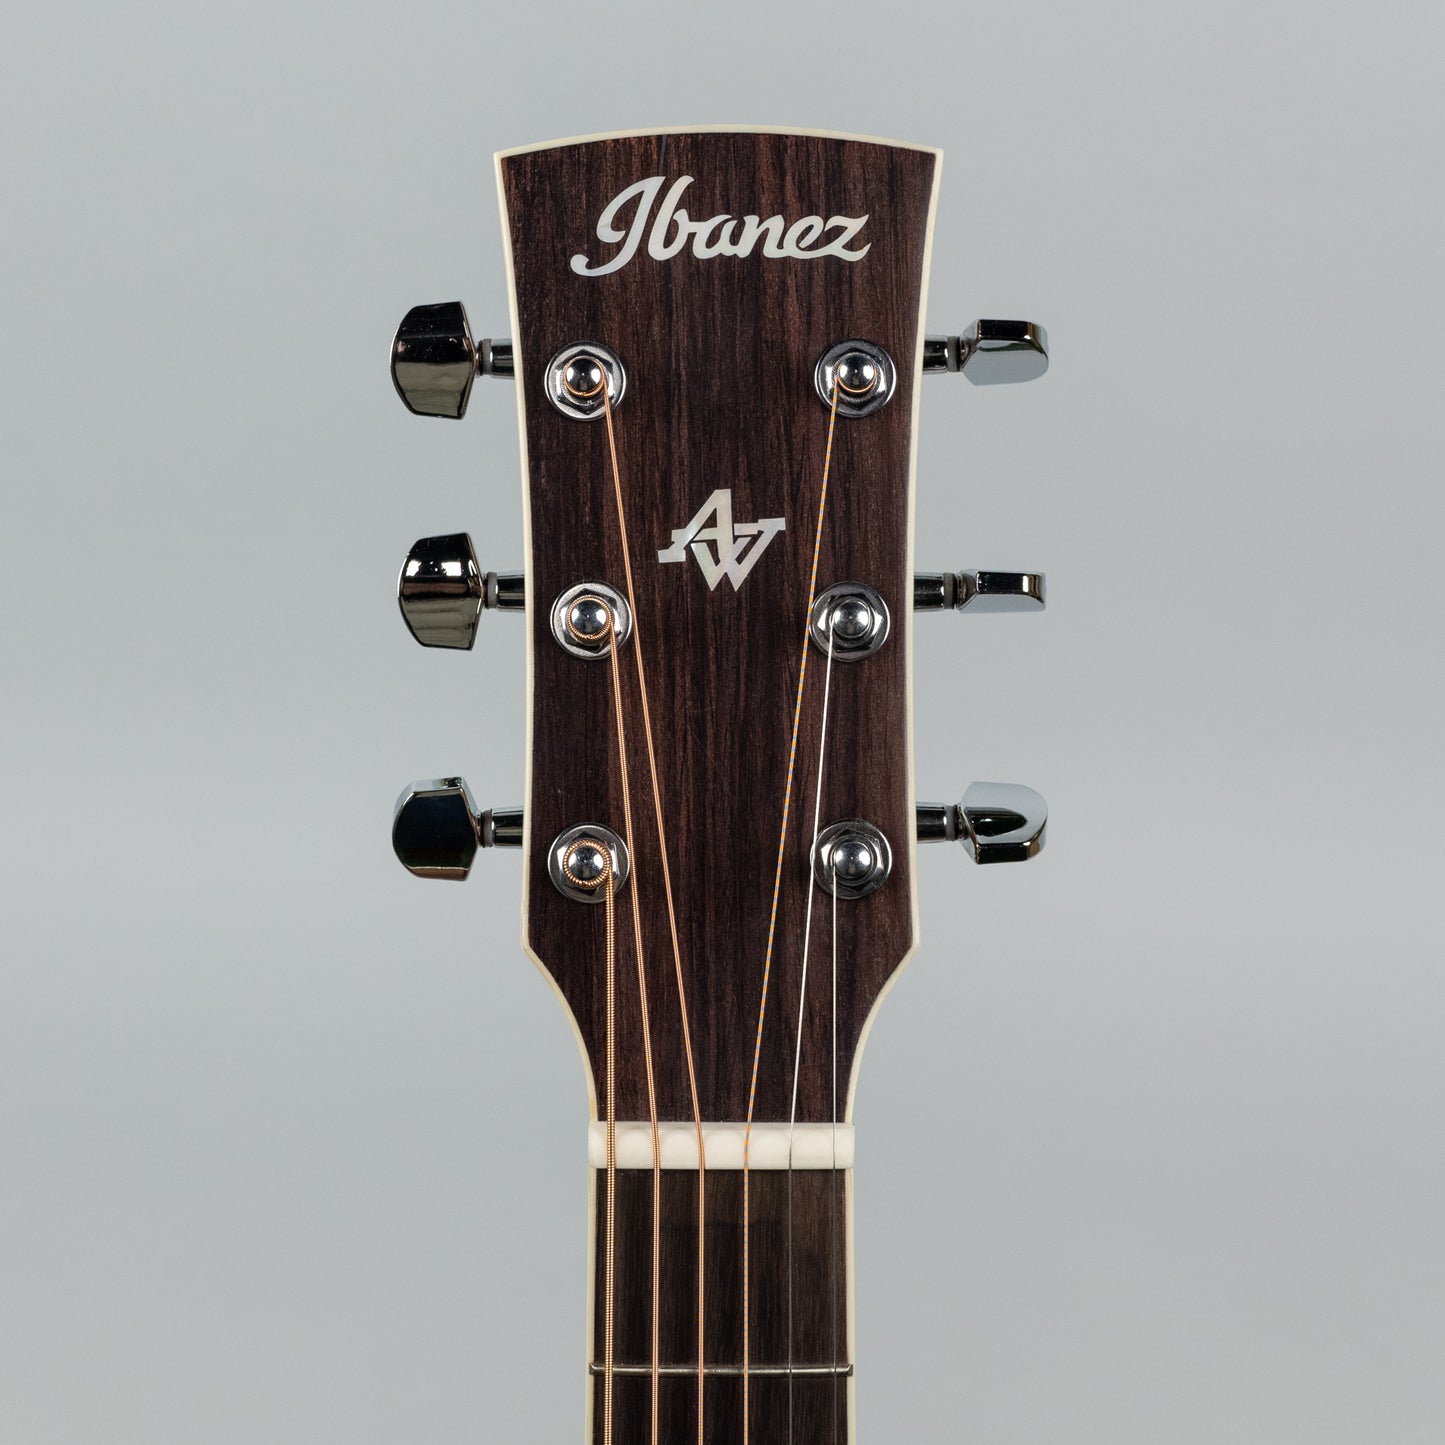 Ibanez AC340-OPN Acoustic Guitar in Open Pore Natural